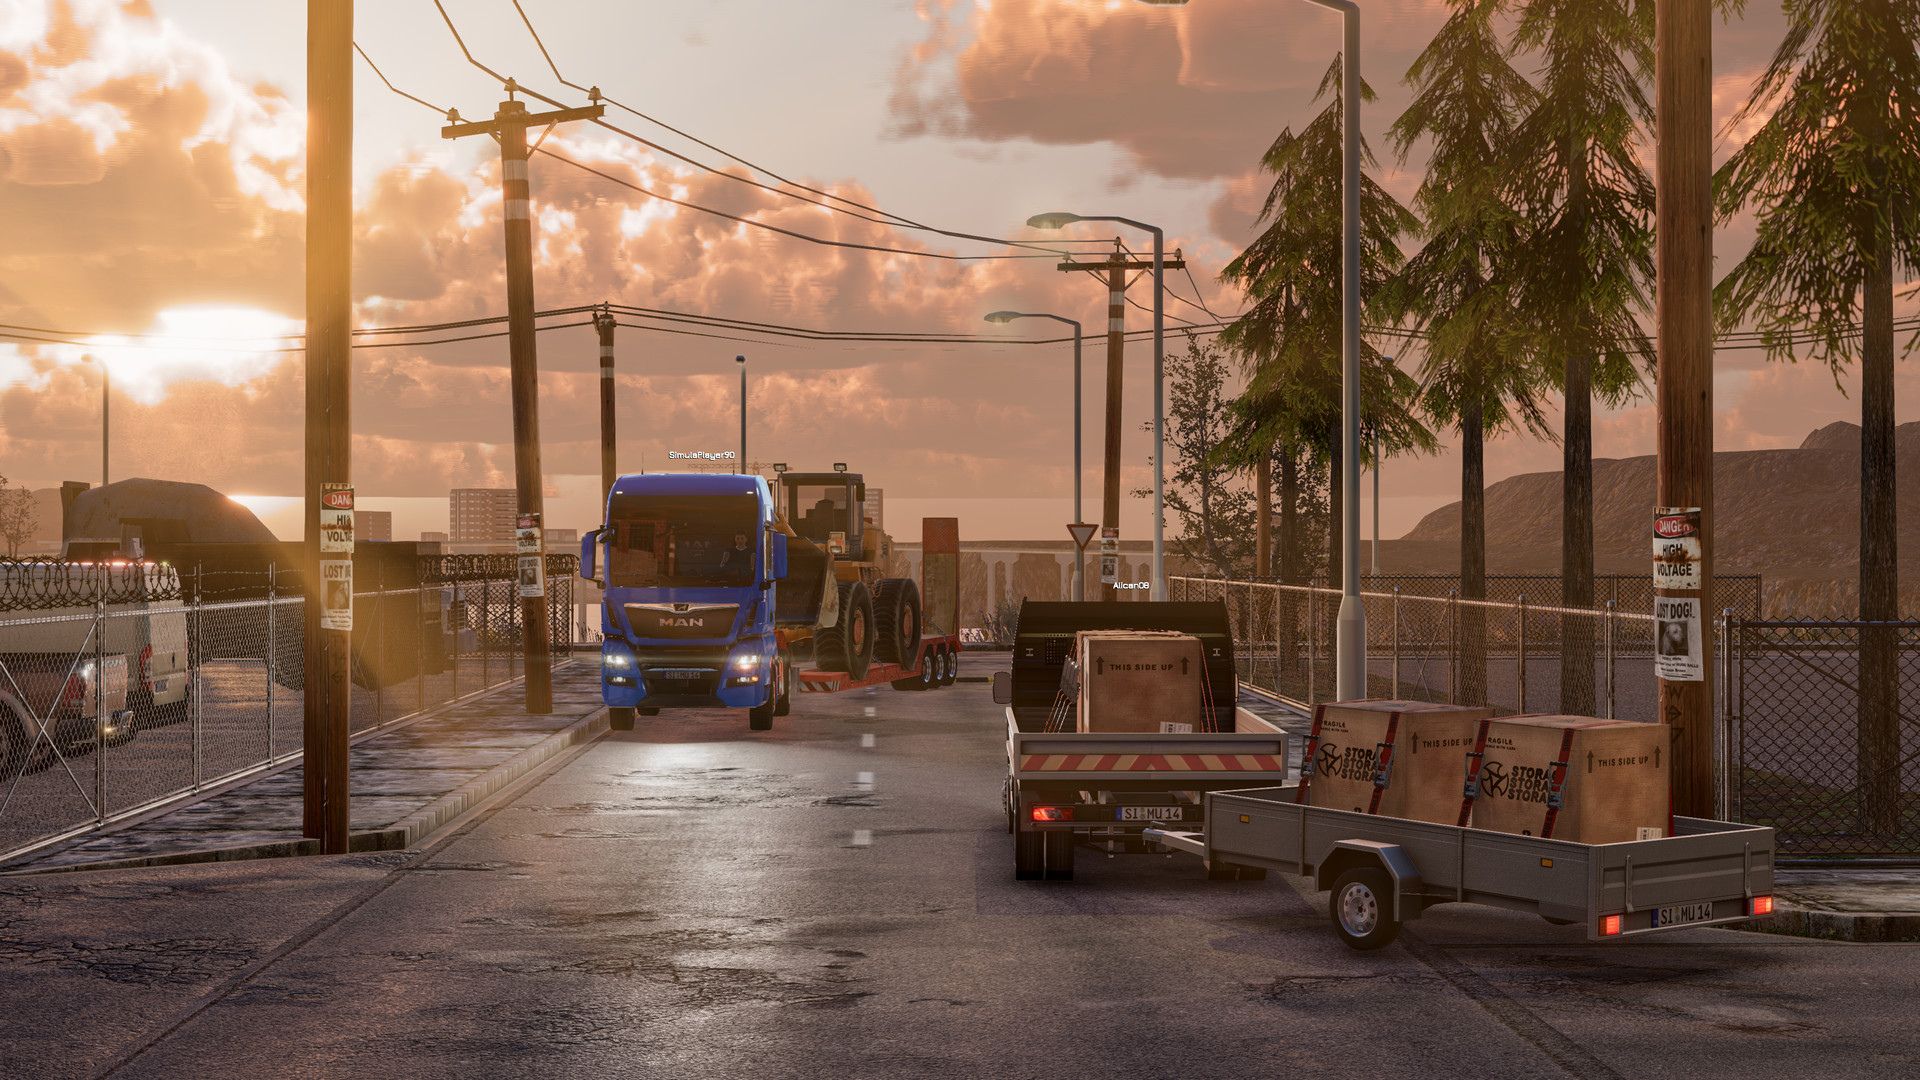 The best truck games on PC 2023